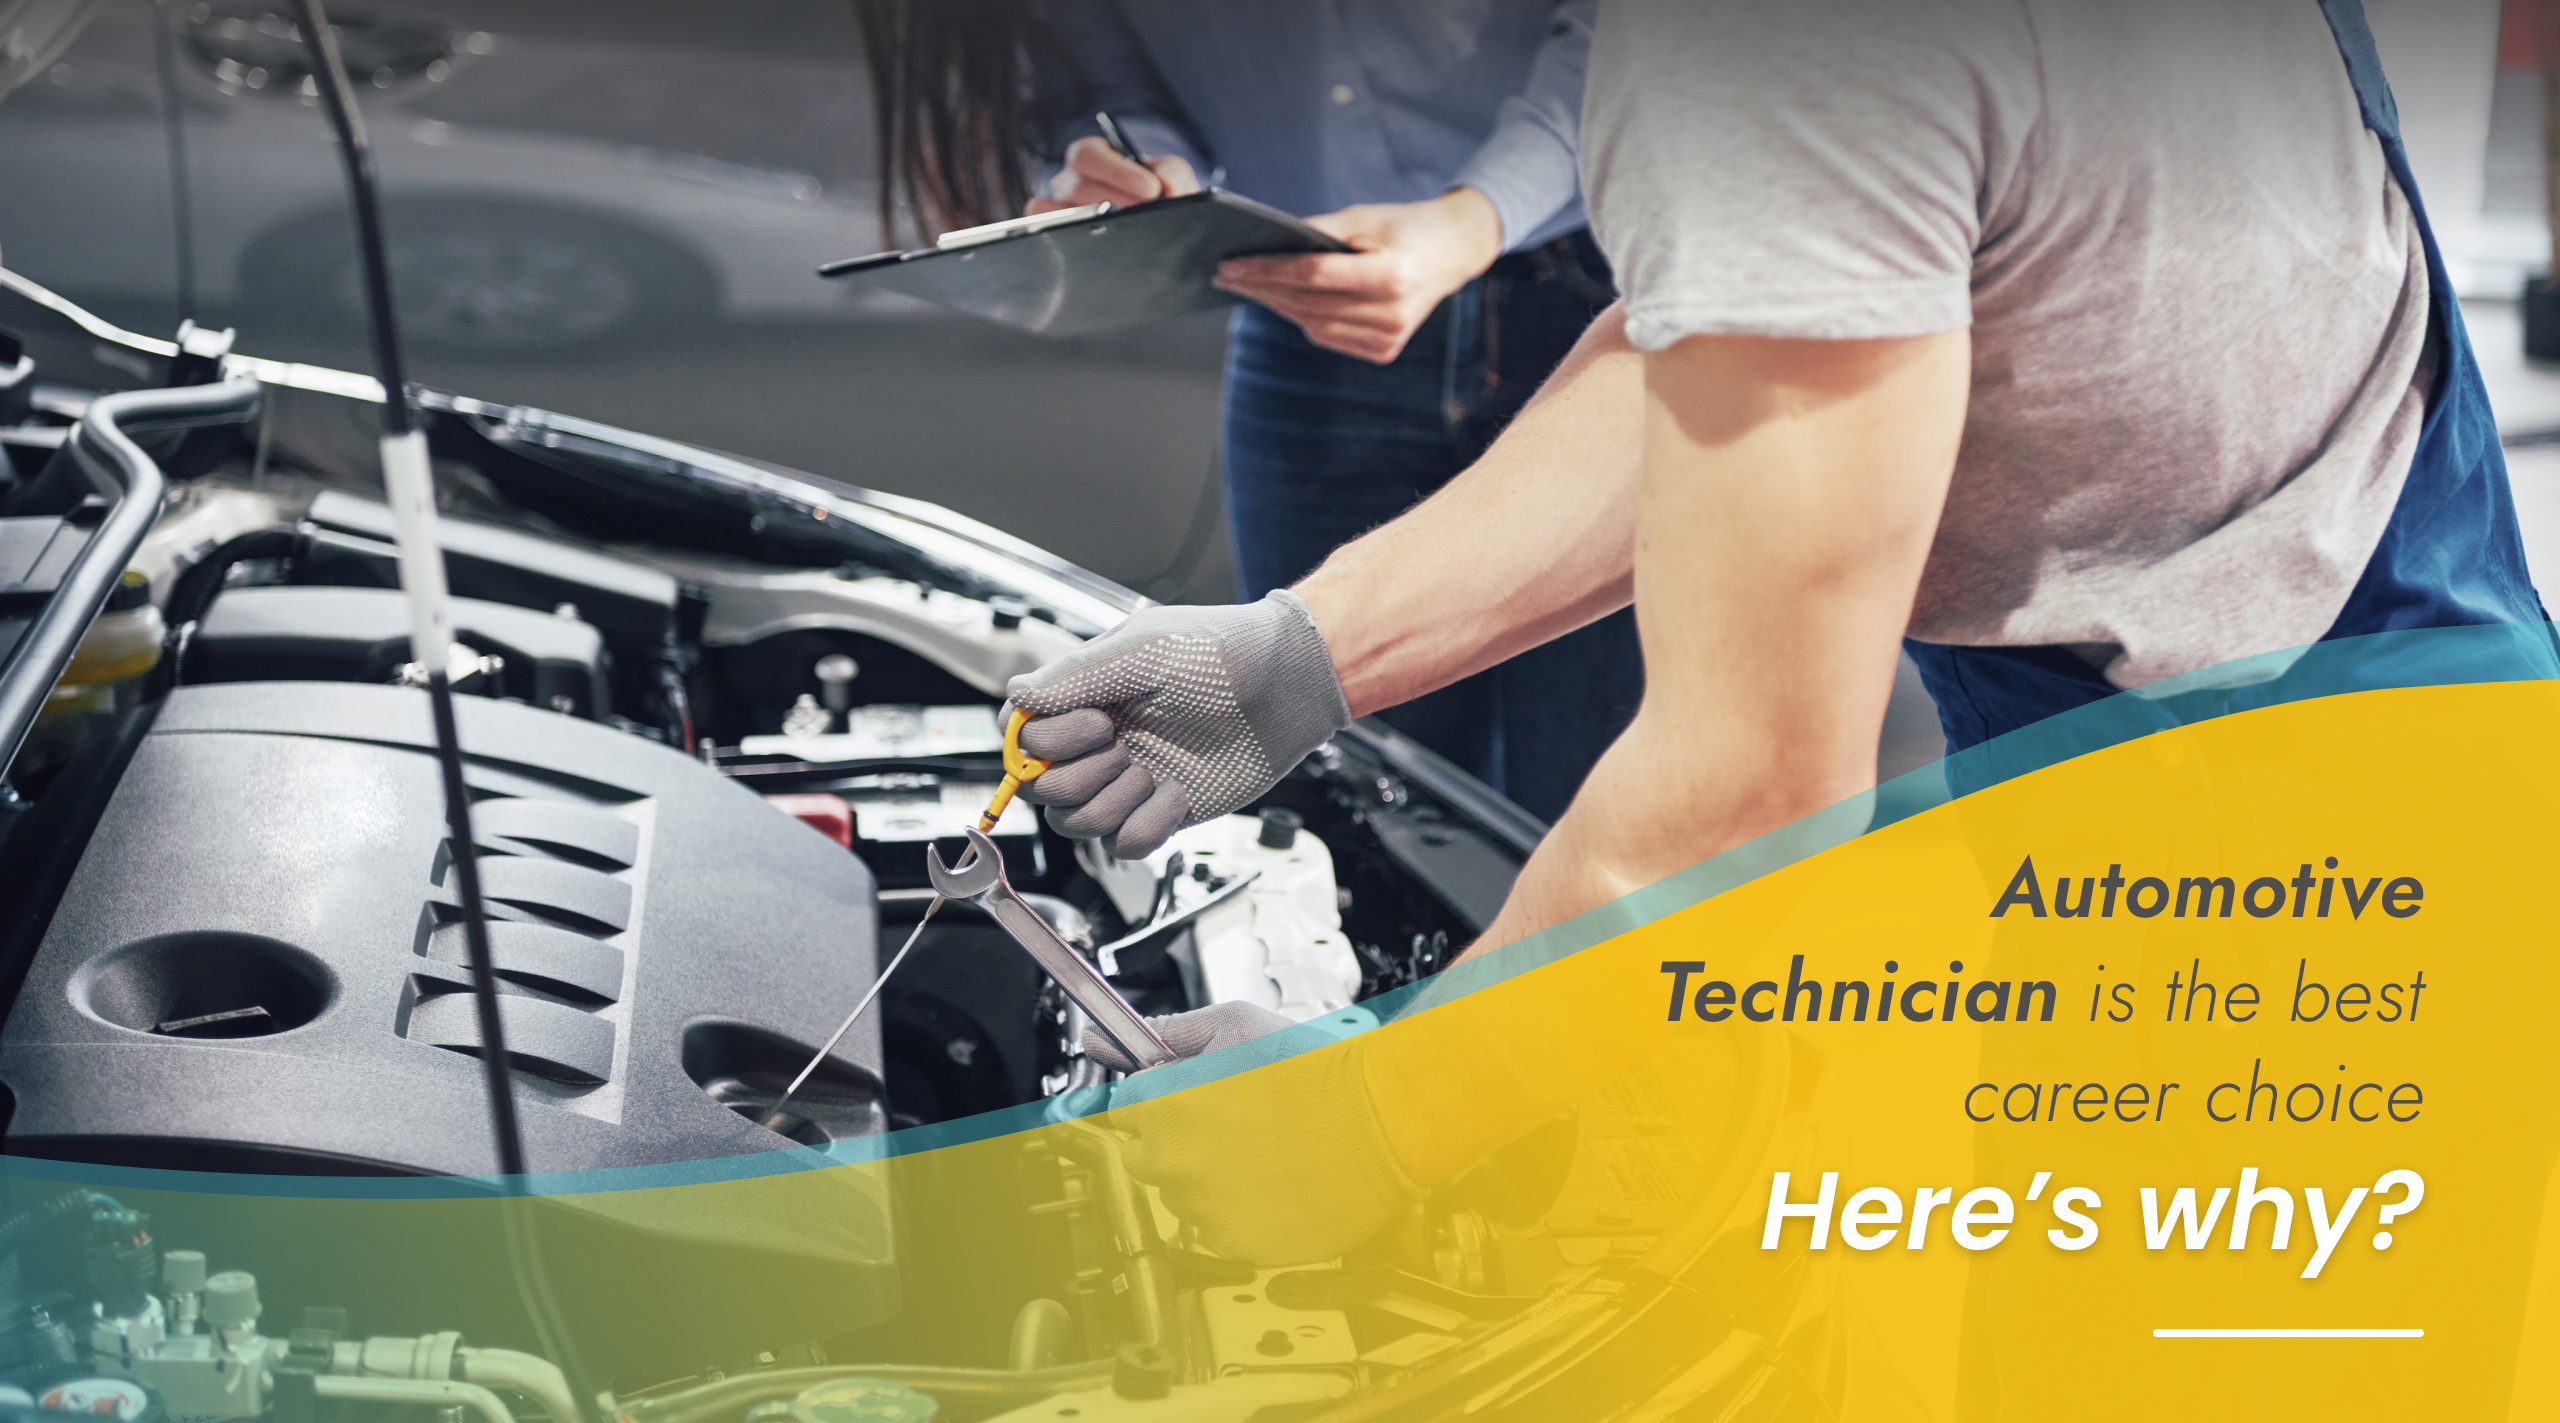 Automotive Technician Is The Best Career Choice: Here’s Why